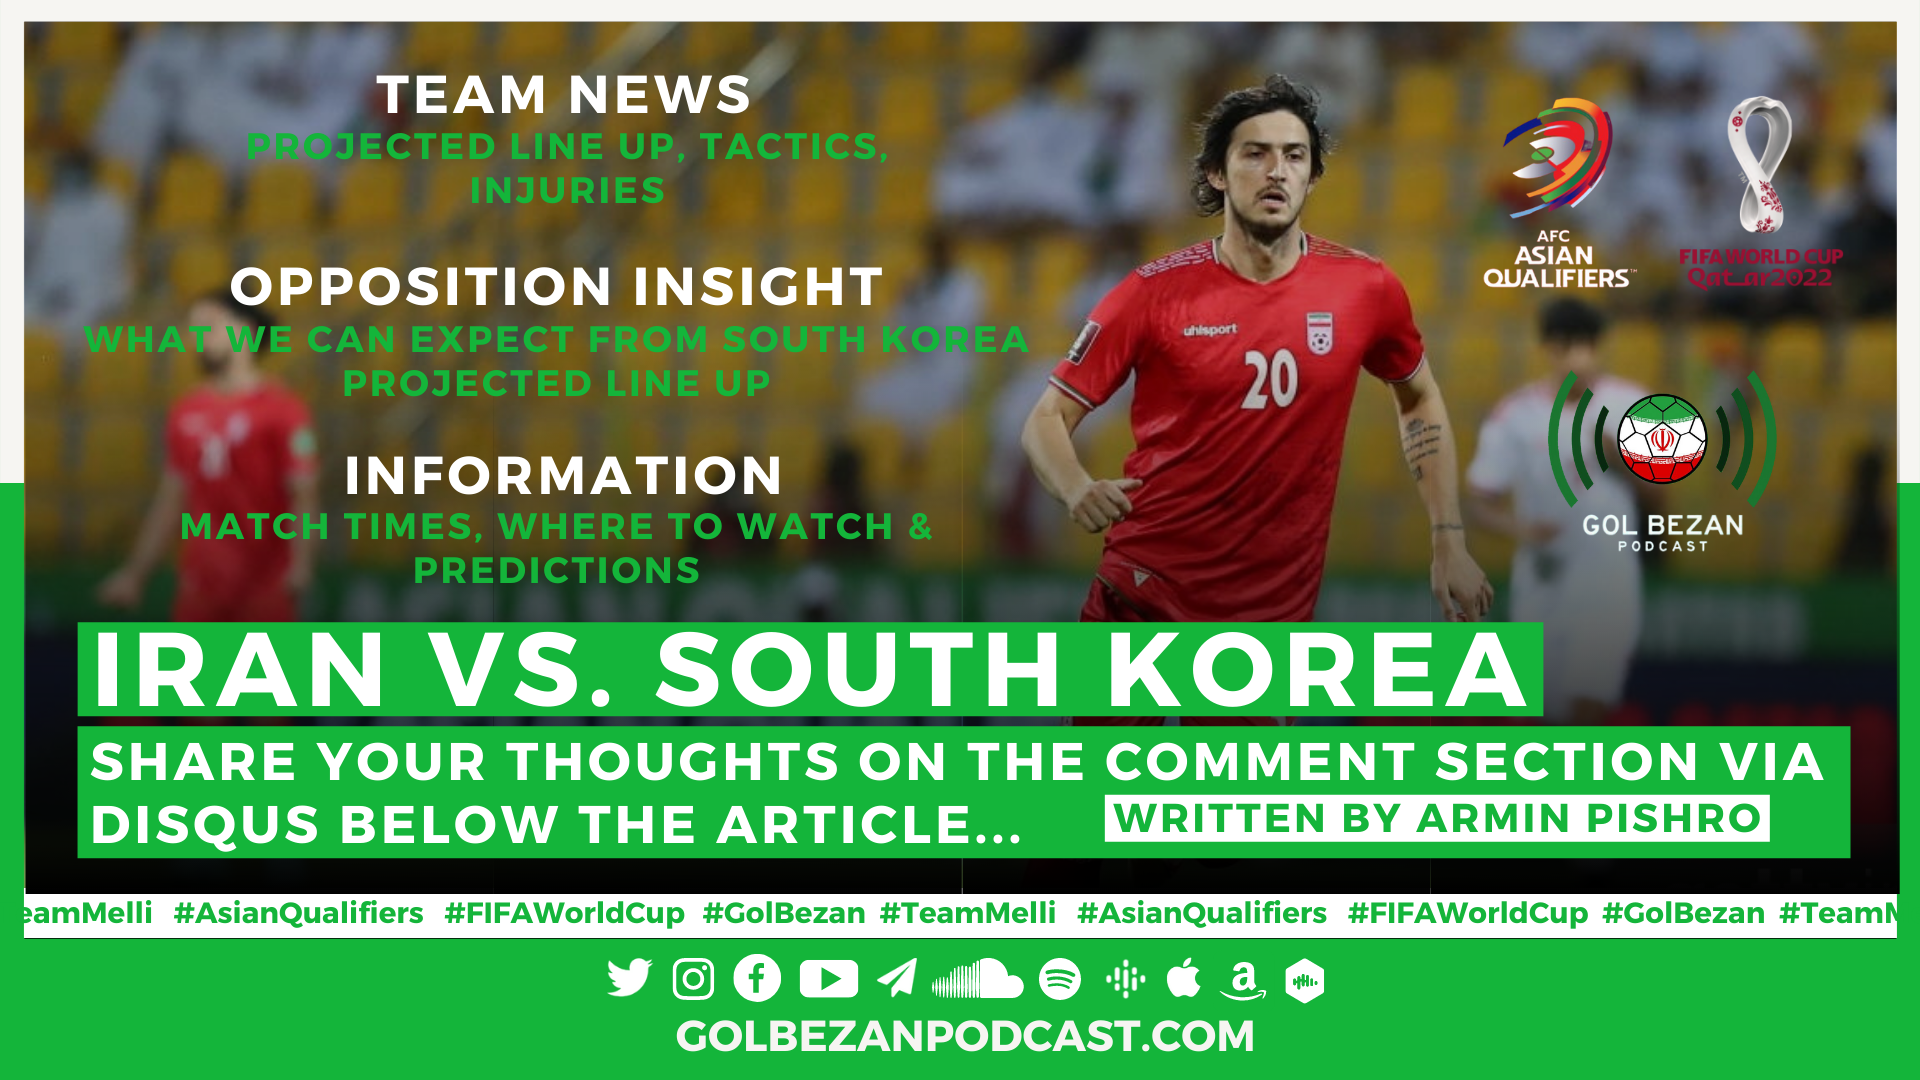 PREVIEW: Iran vs. South Korea | 2022 World Cup Qualifiers - Team News, Opposition Insight, Predictions and More